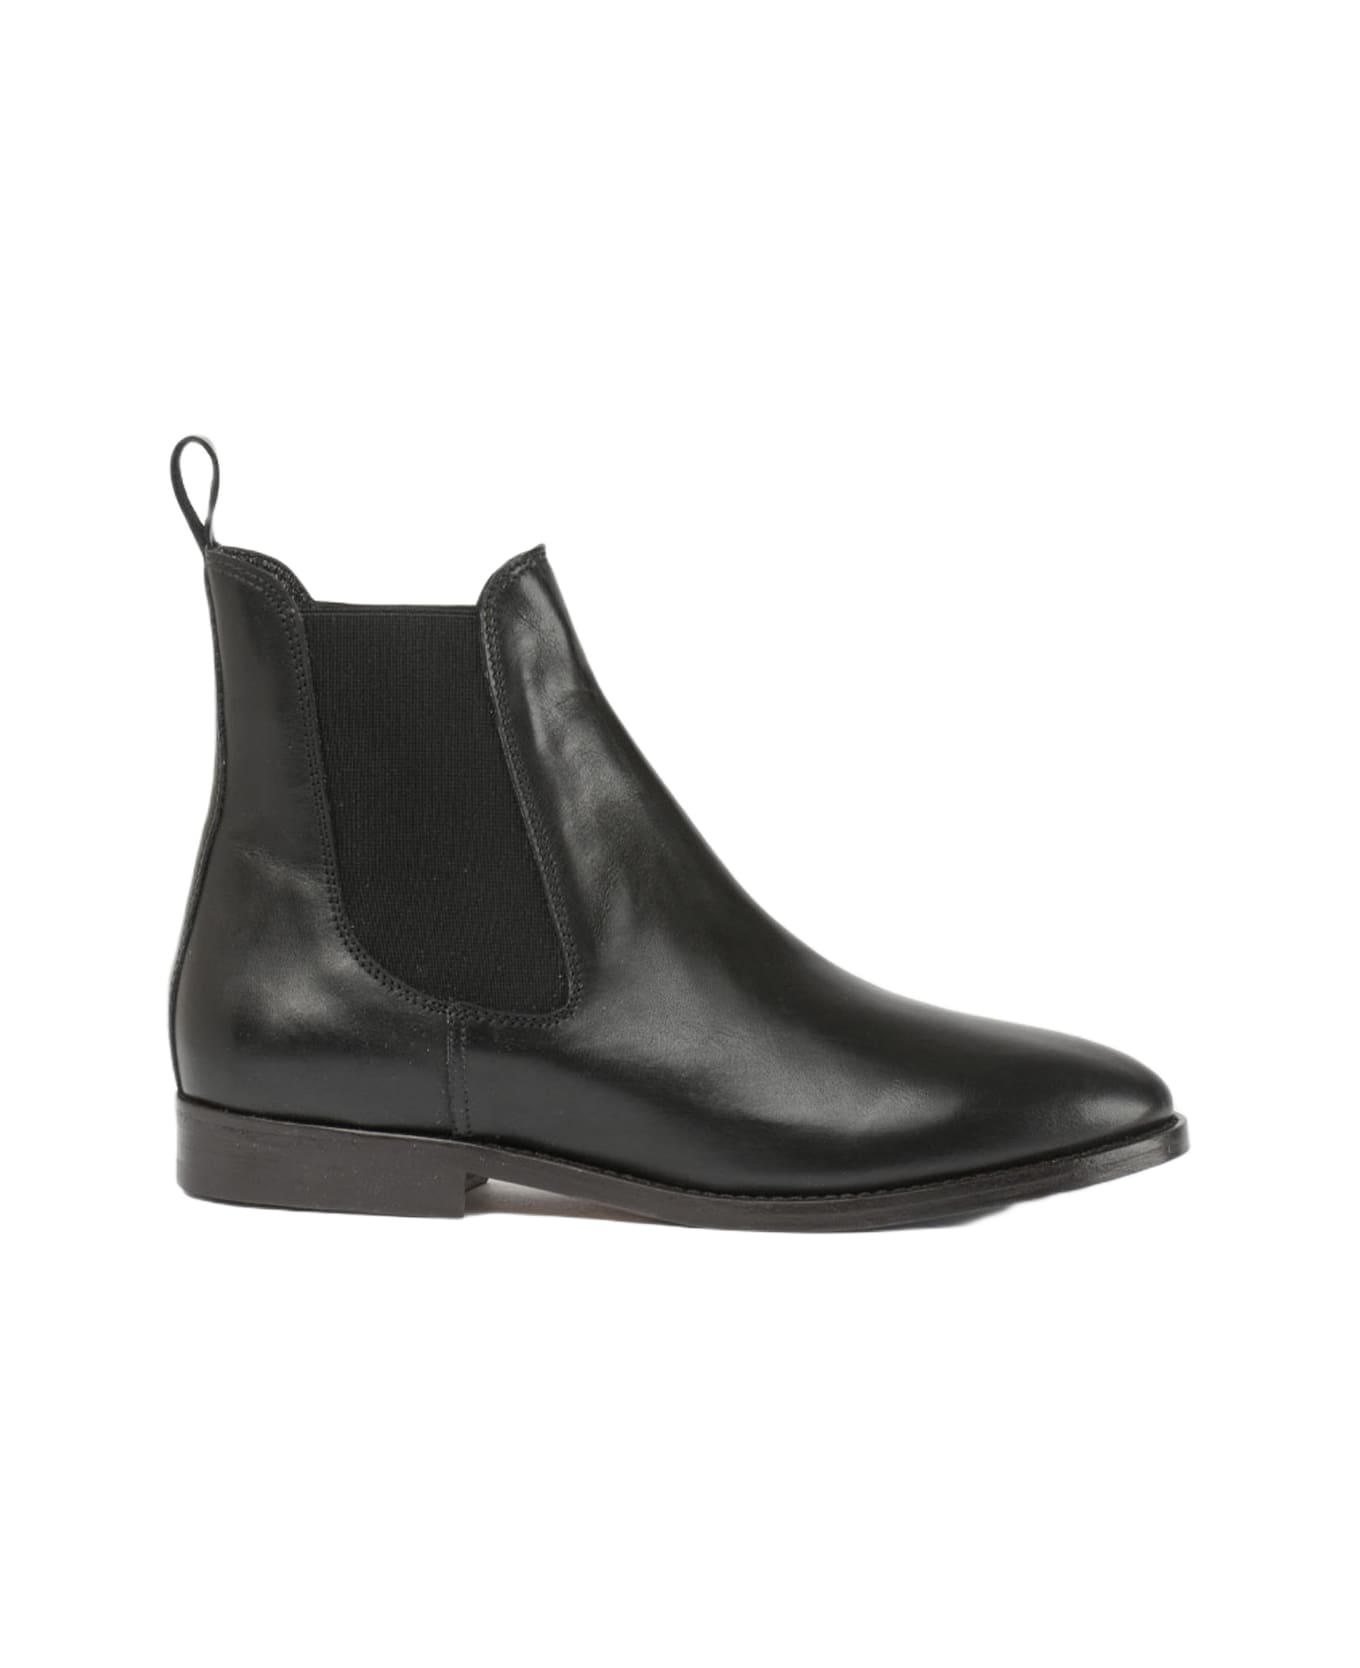 CB Made in Italy Leather Boots Sessanta - Black